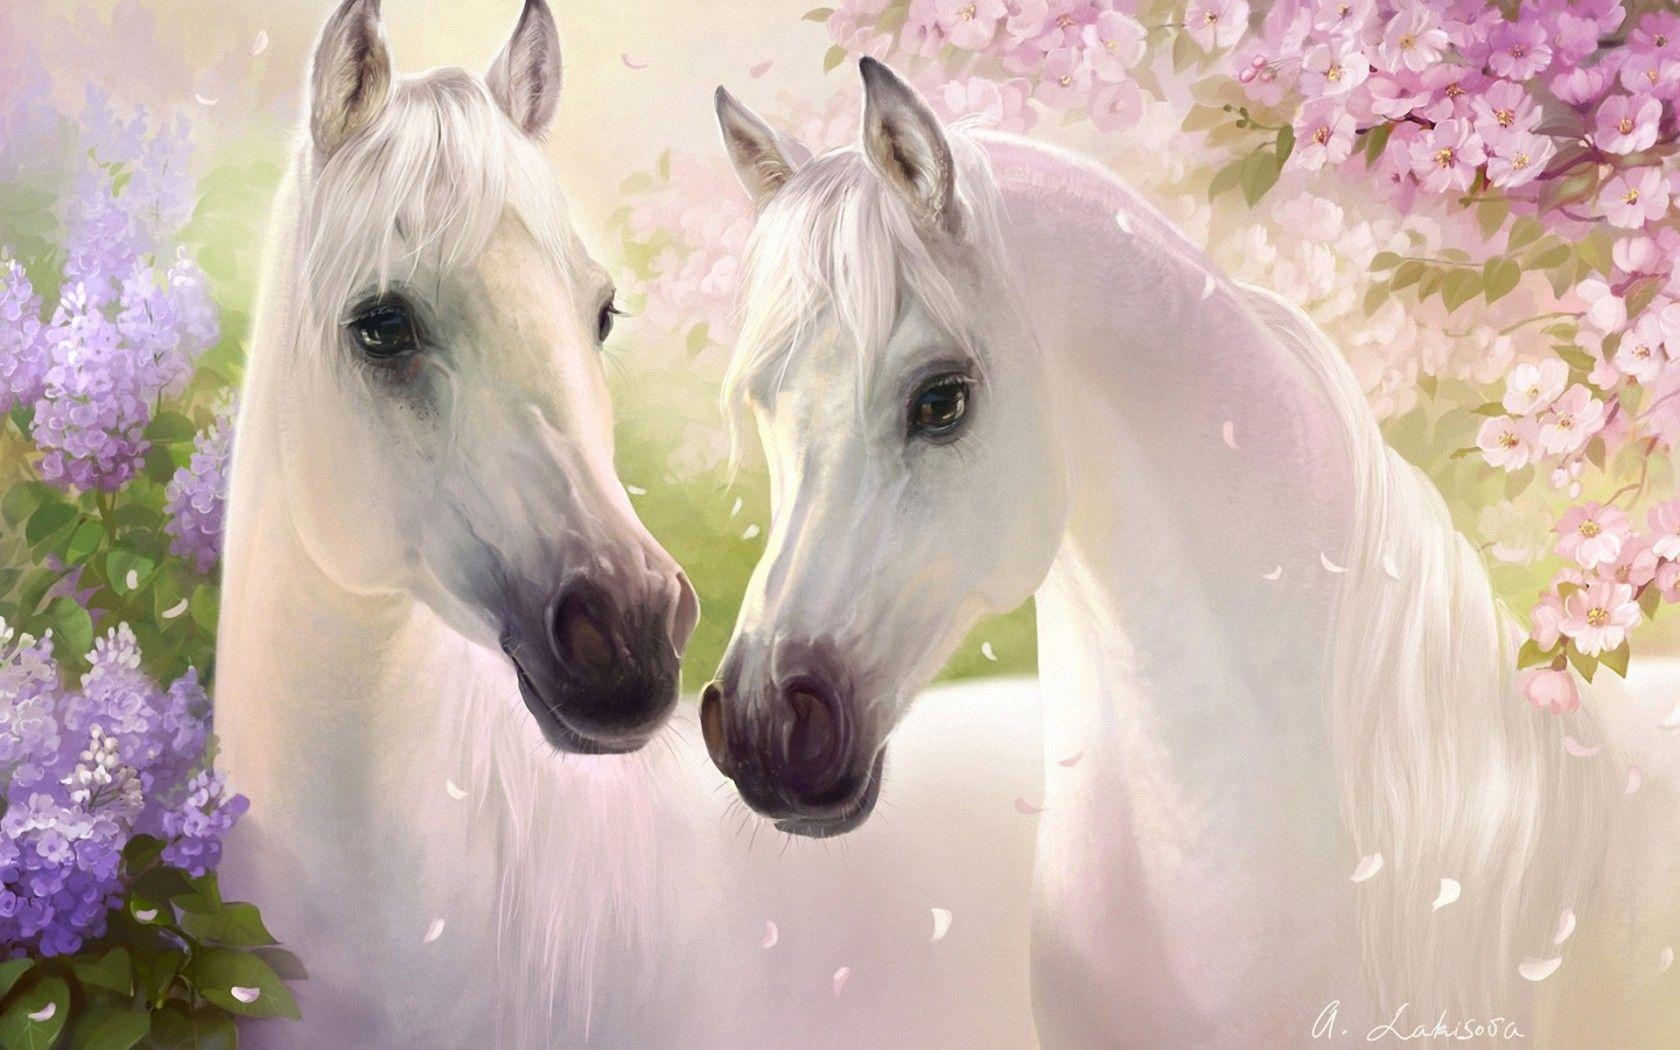 Beautiful White Horses Painting widescreen wallpaper. Wide